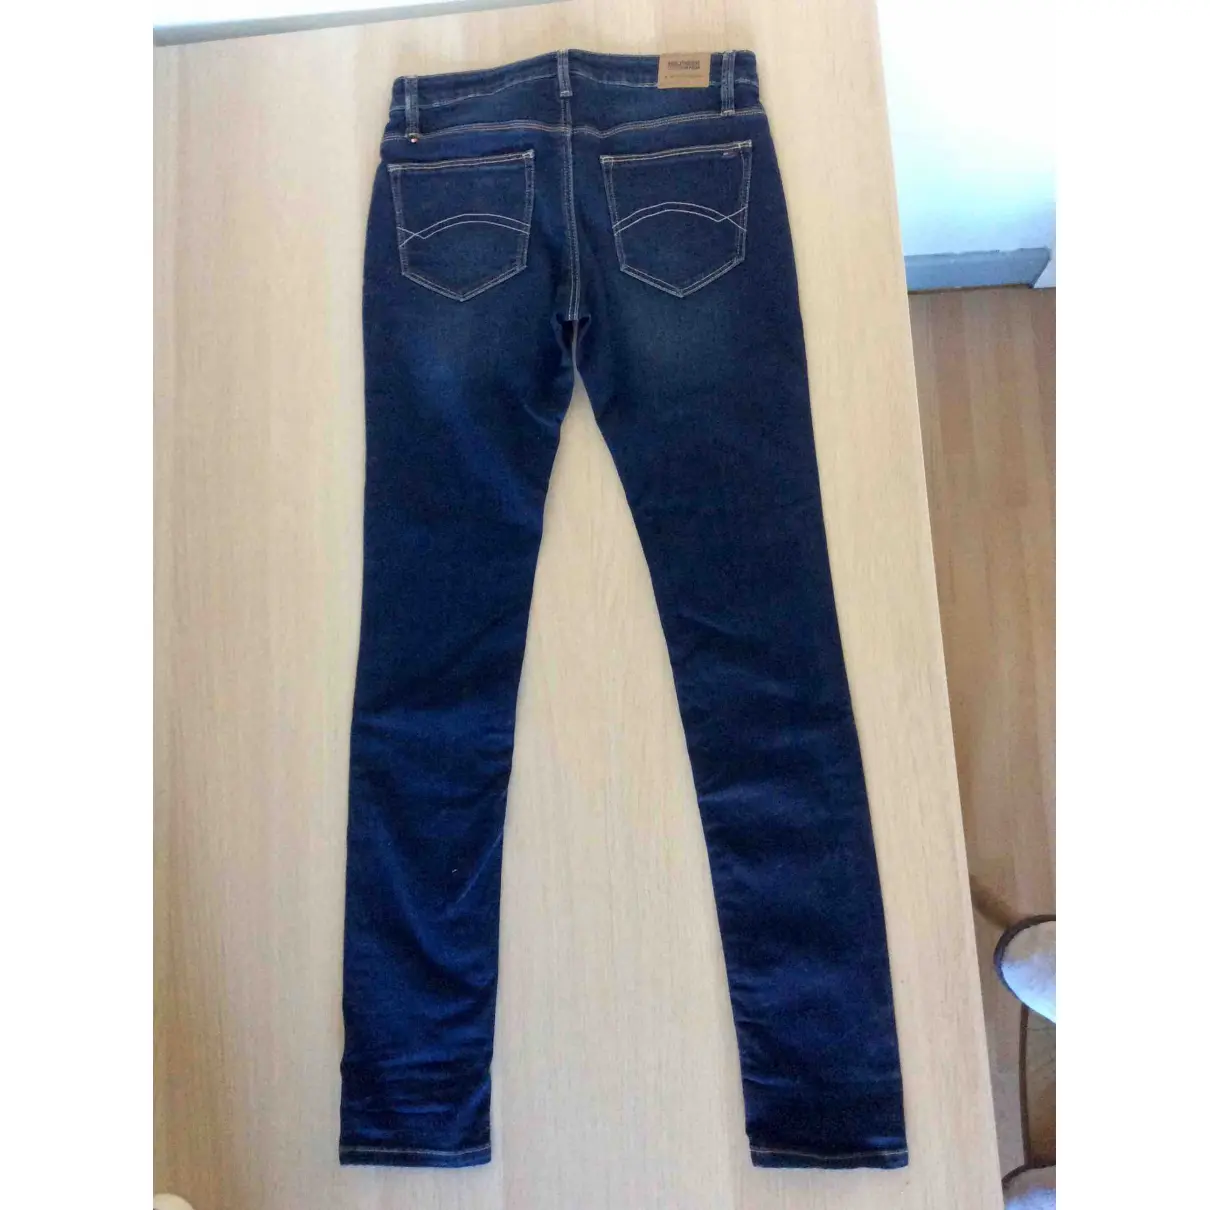 Buy Tommy Jeans Pants online